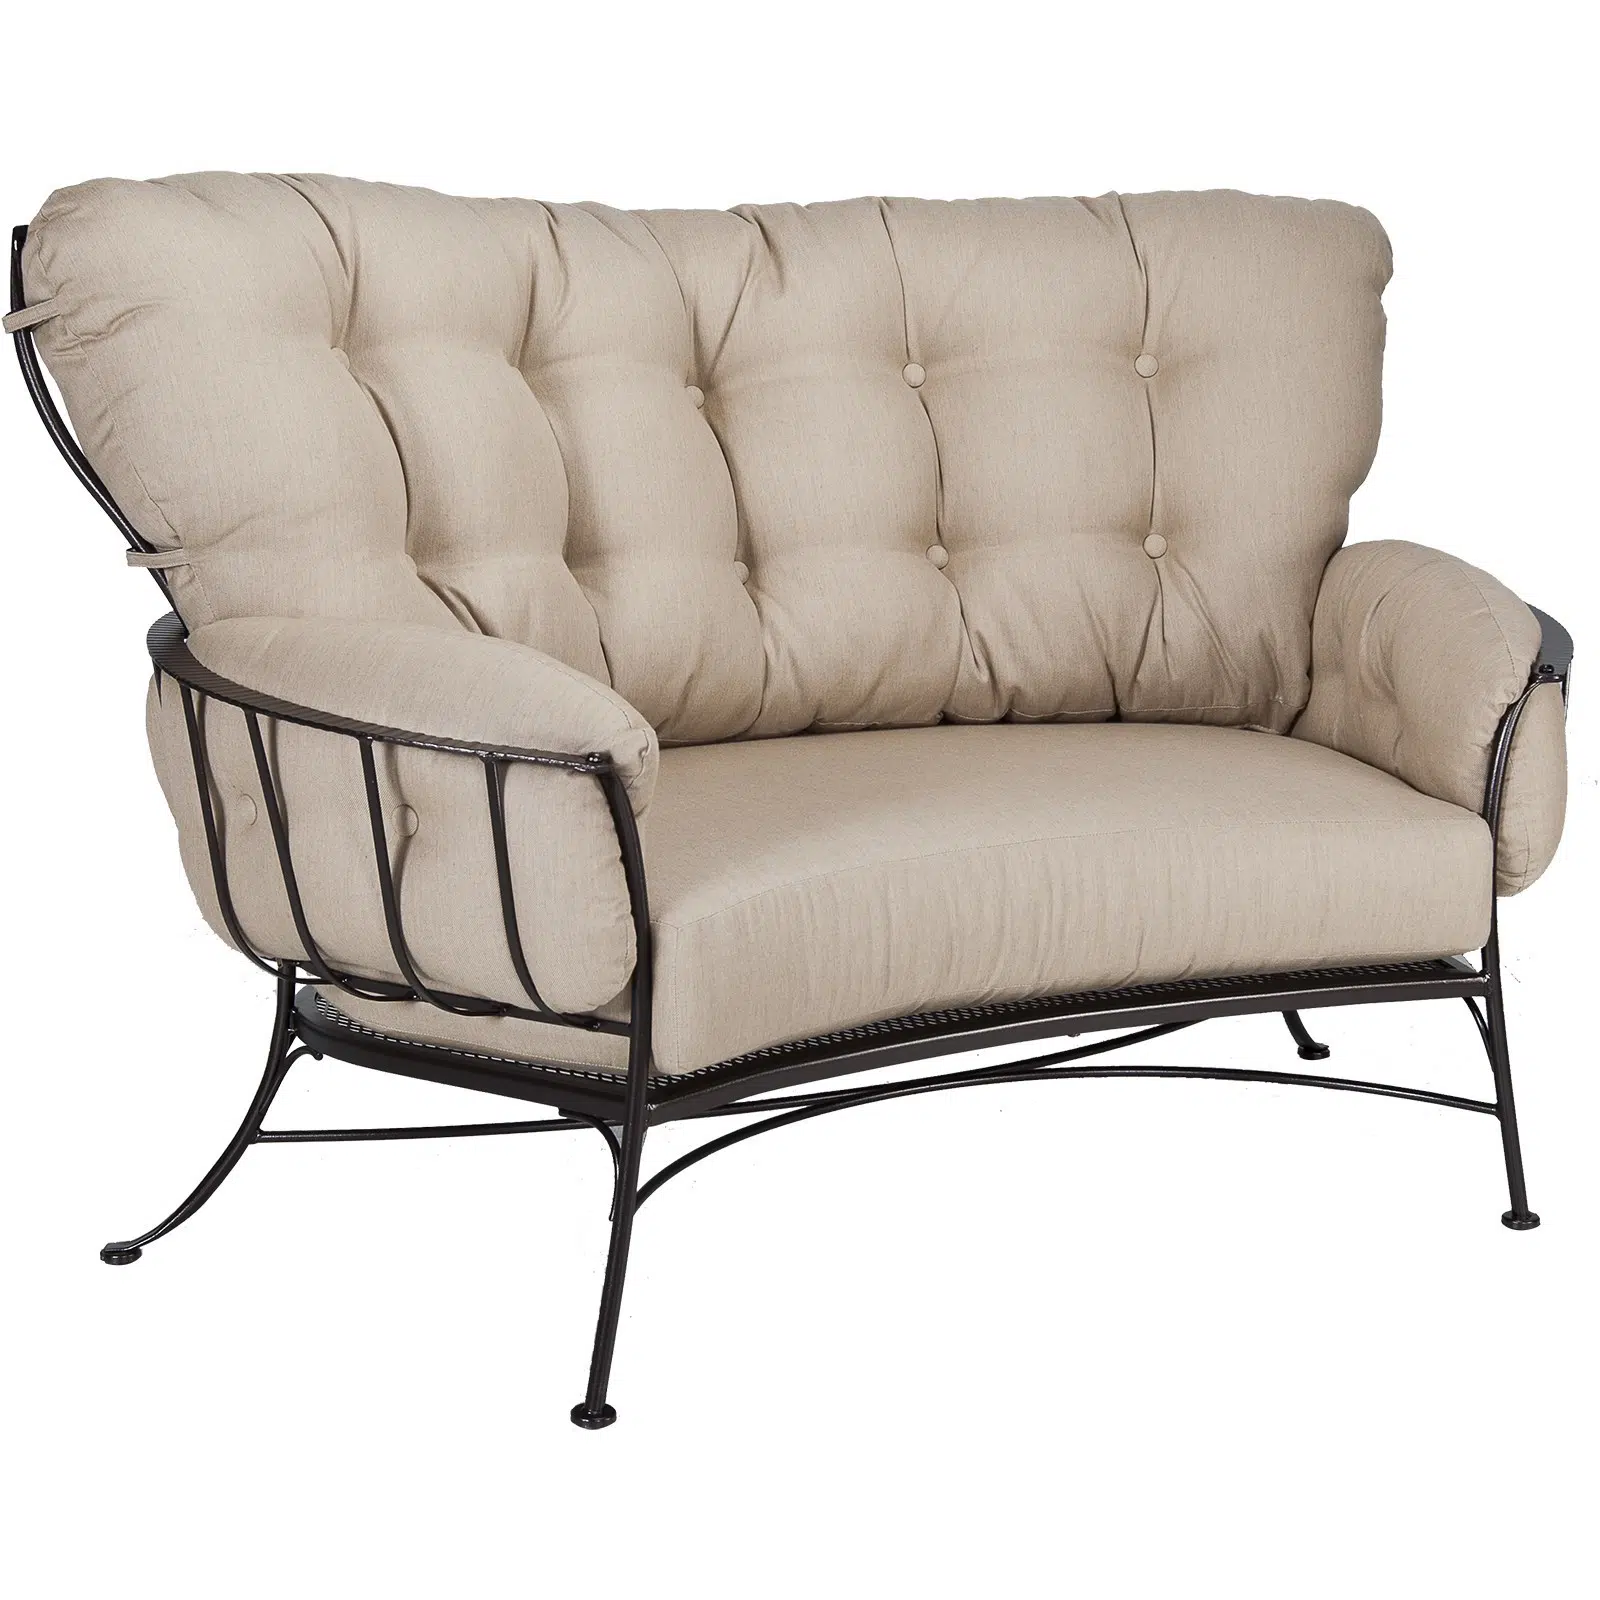 Monterra crescent love seat luxury outdoor living by hausers patio